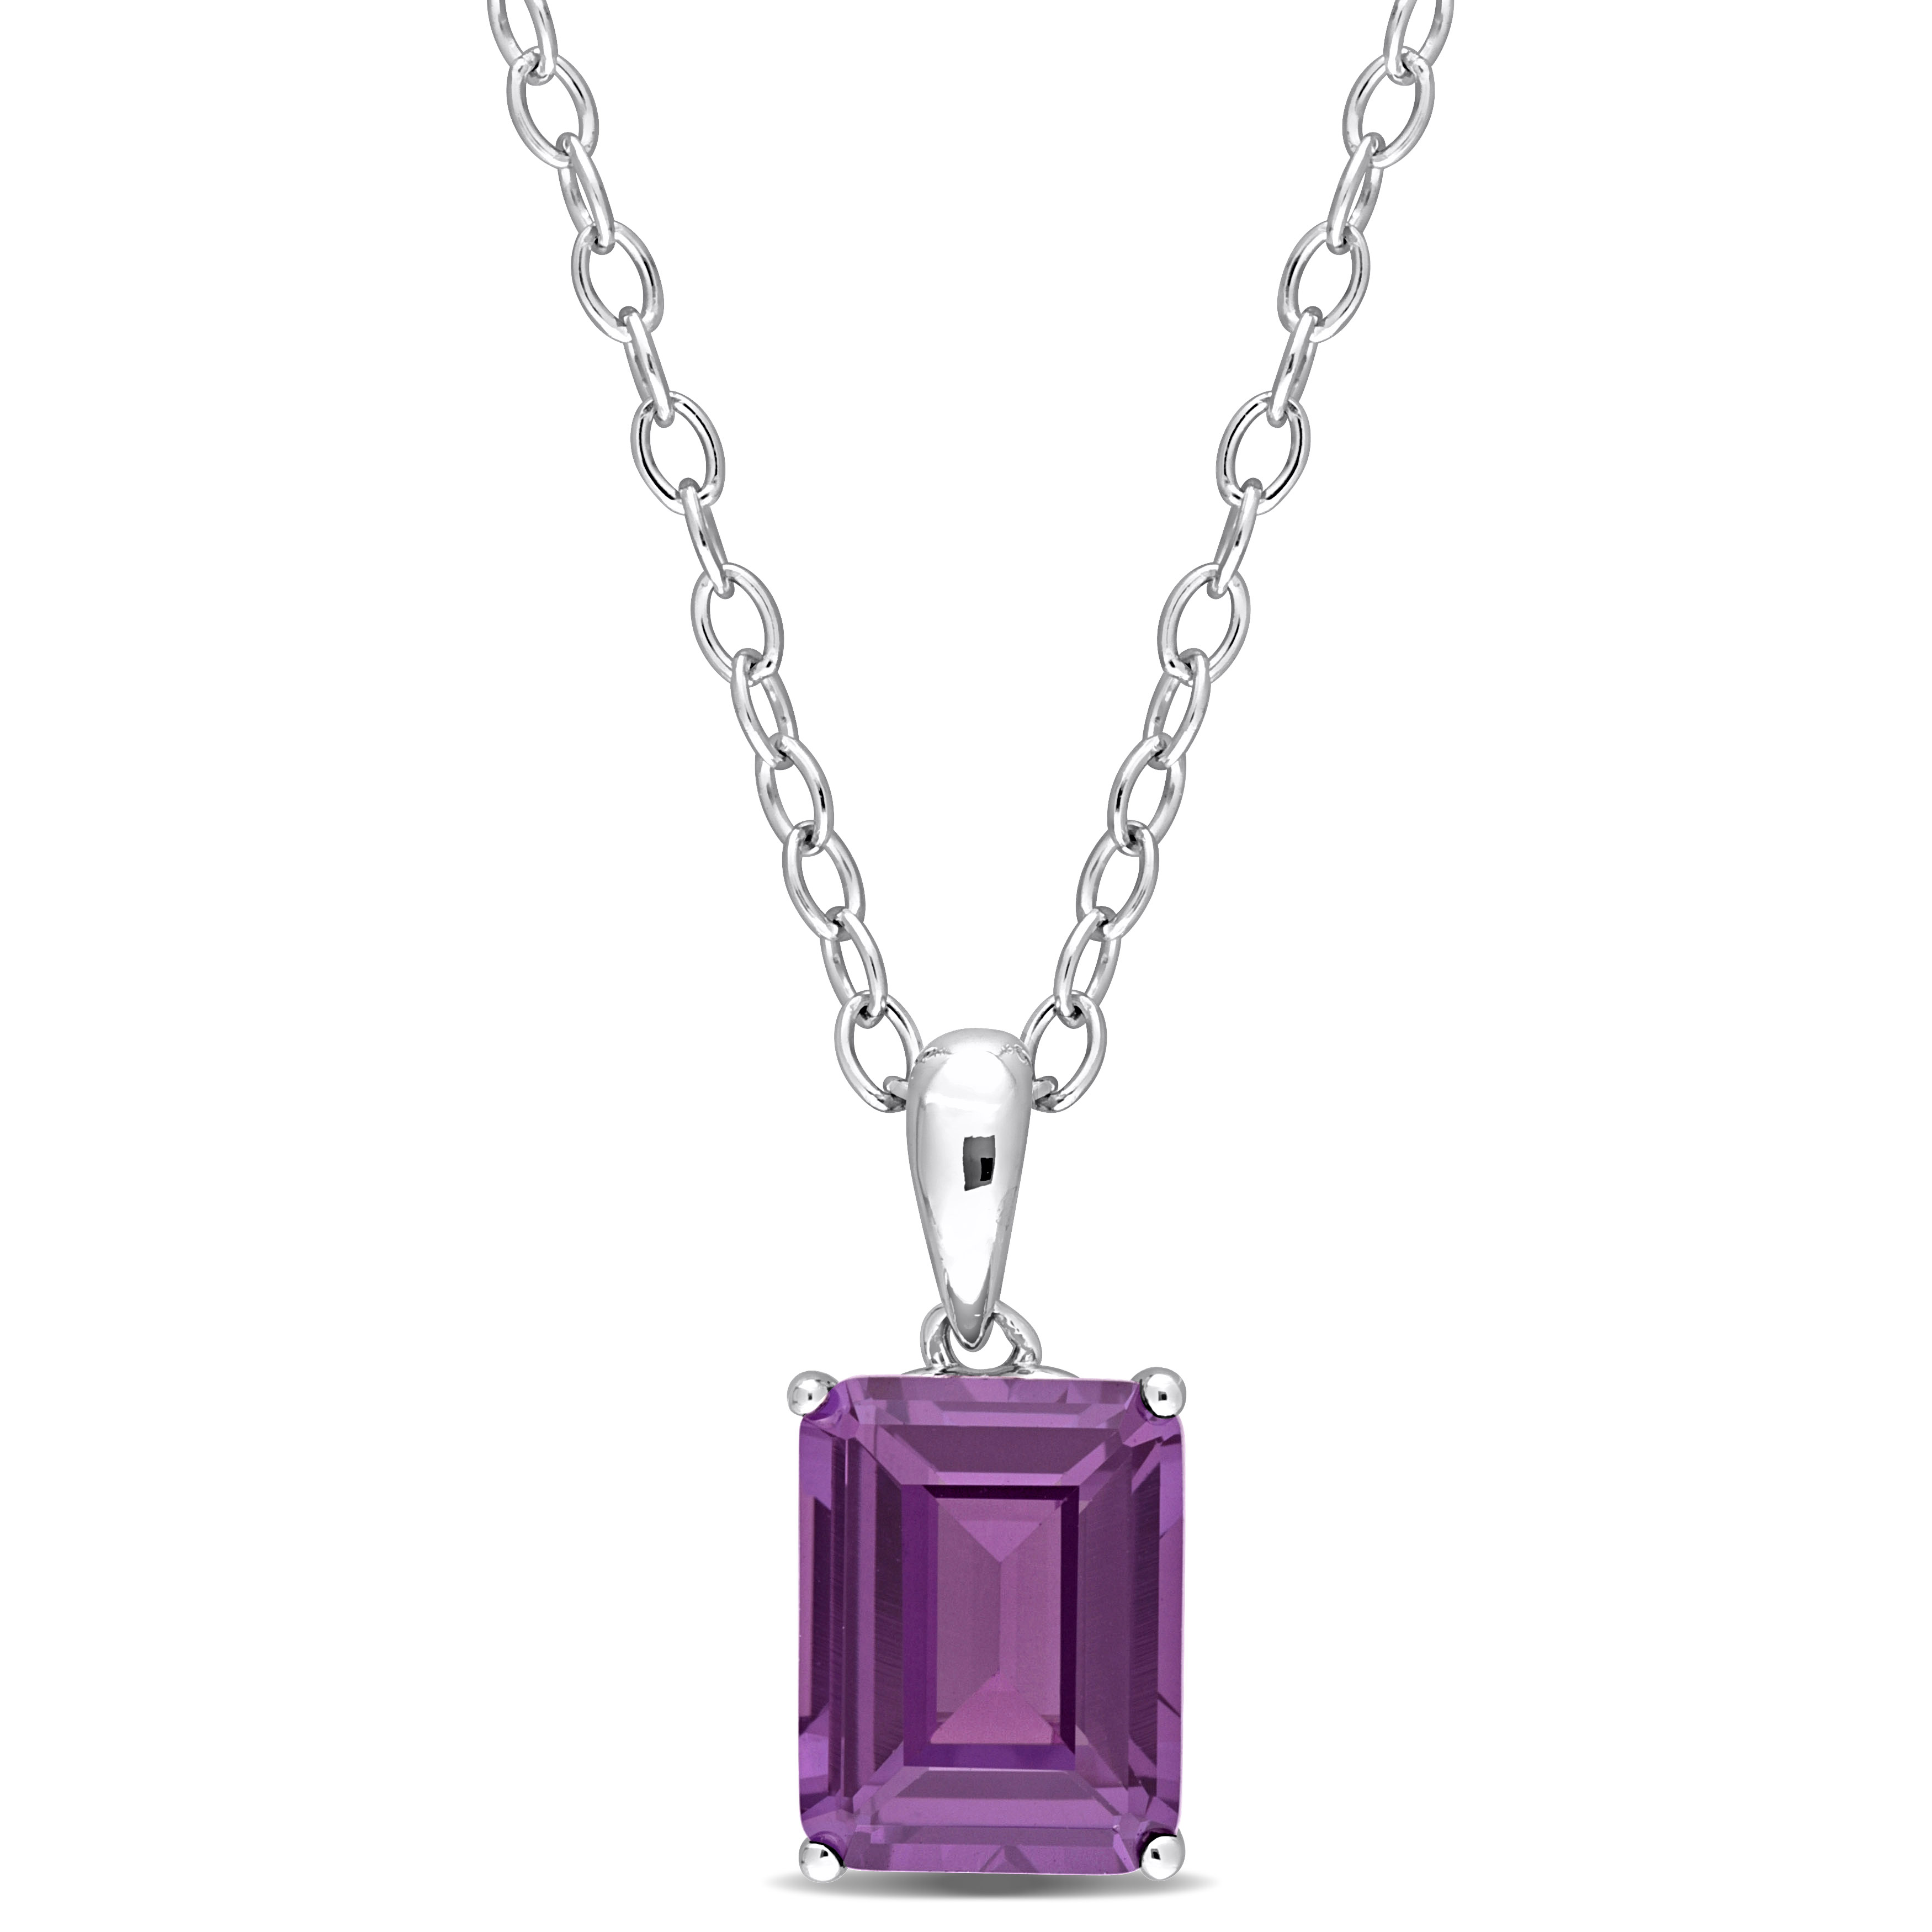 2 1/3 CT TGW Emerald Cut Simulated Alexandrite Solitaire Heart Design Pendant with Chain in Sterling Silver - 18 in.